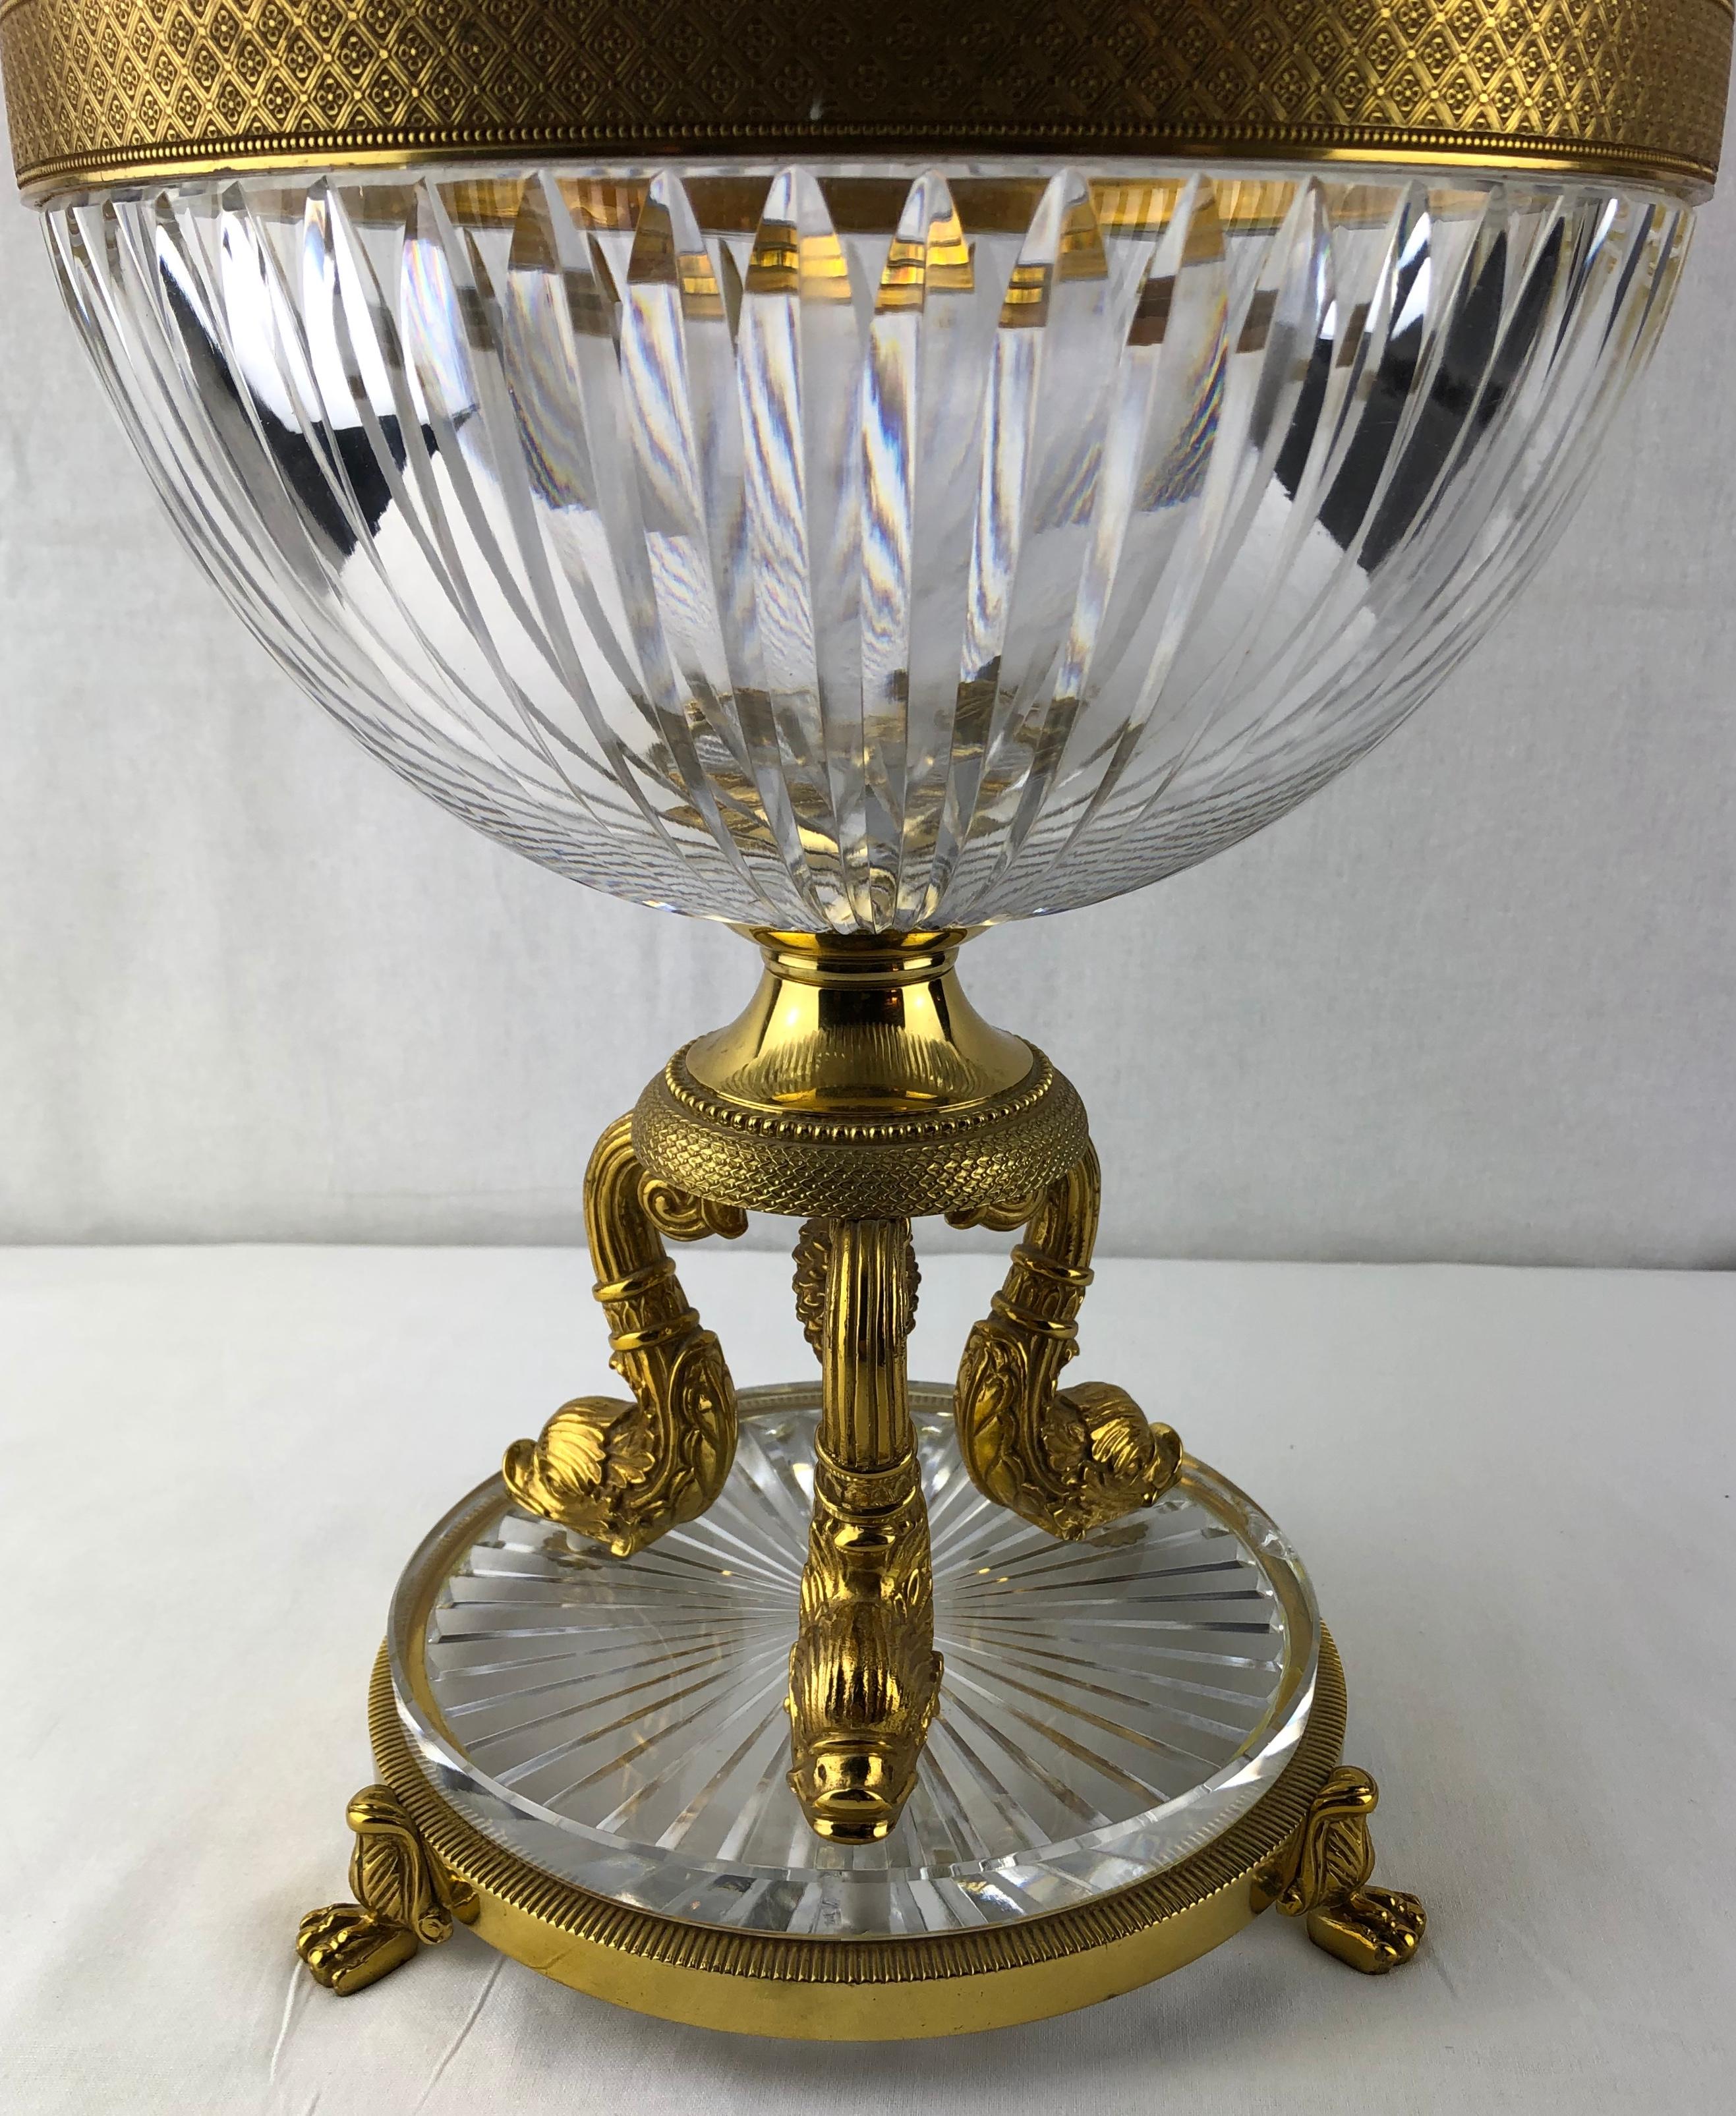 A superb quality and large scaled neoclassical or Empire style crystal caviar bowl. It can also be used as a centerpiece on your favorite entry table or wall console. 

Place this magnificent piece in the sunlight and watch the stunning colors